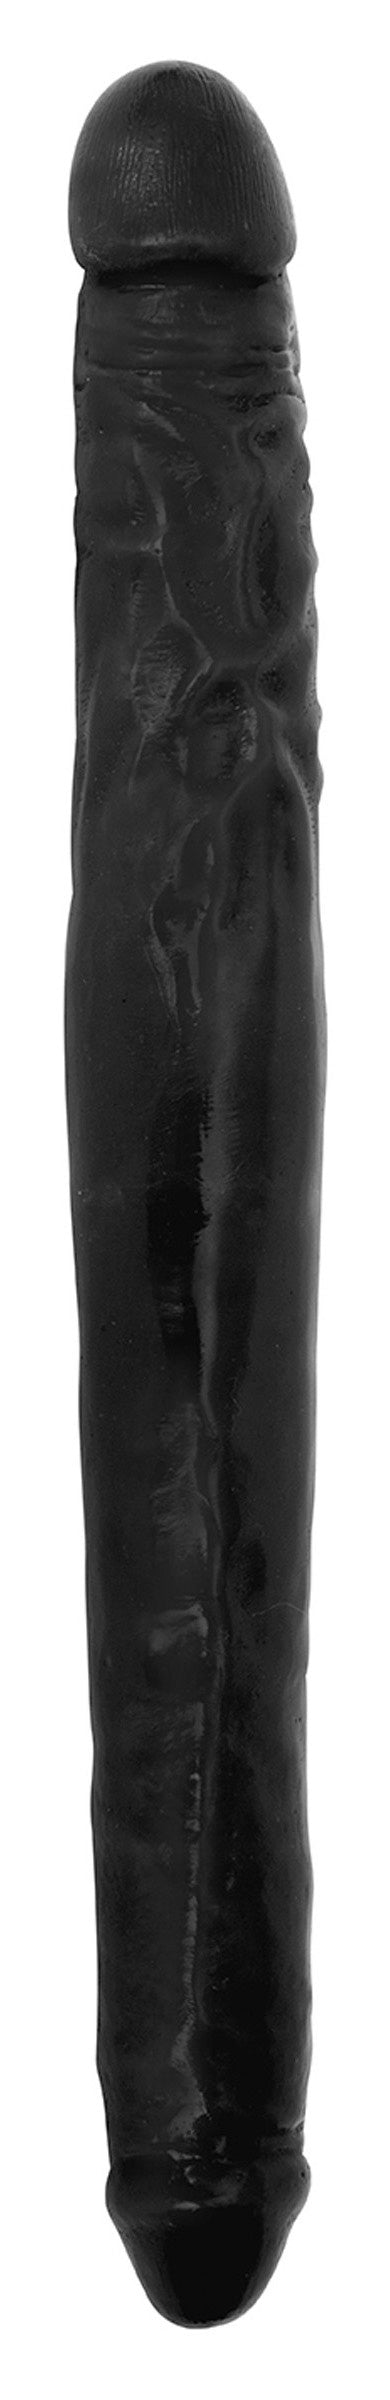 JOCK 16 Inch Tapered Double Dong Black - UABDSM